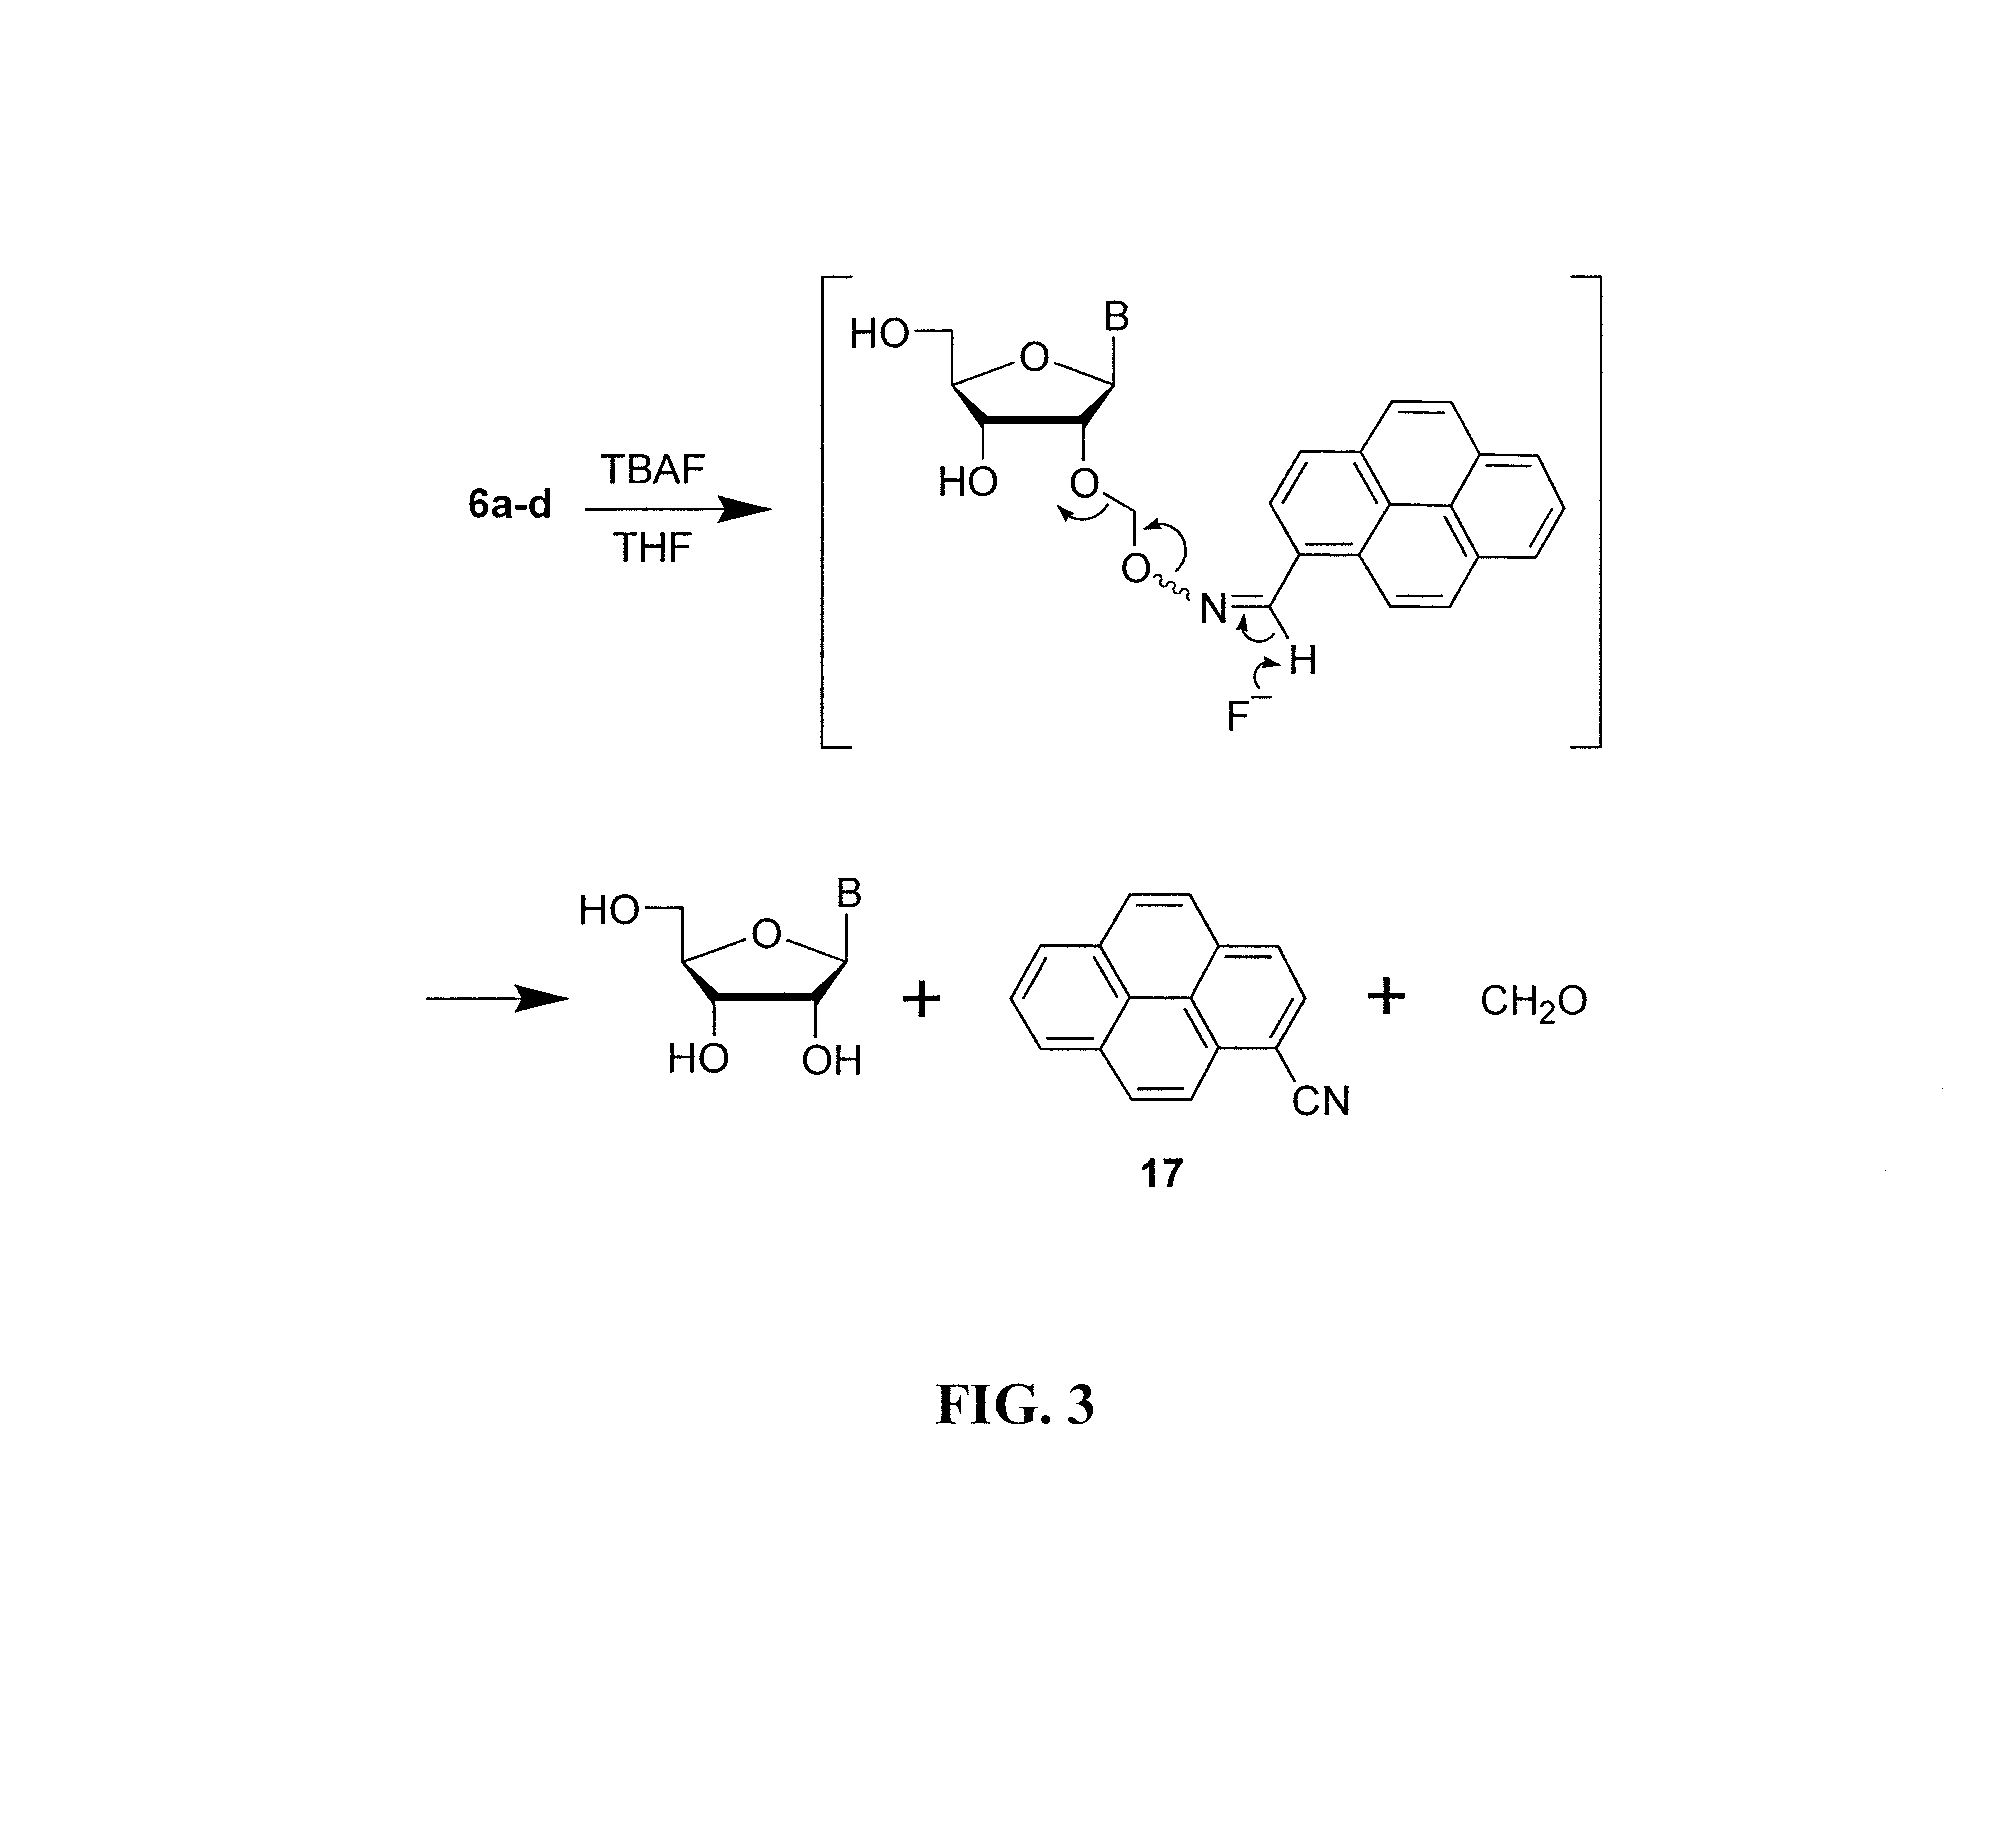 2'-o-aminooxymethyl nucleoside derivatives for use in the synthesis and modification of nucleosides, nucleotides and oligonucleotides